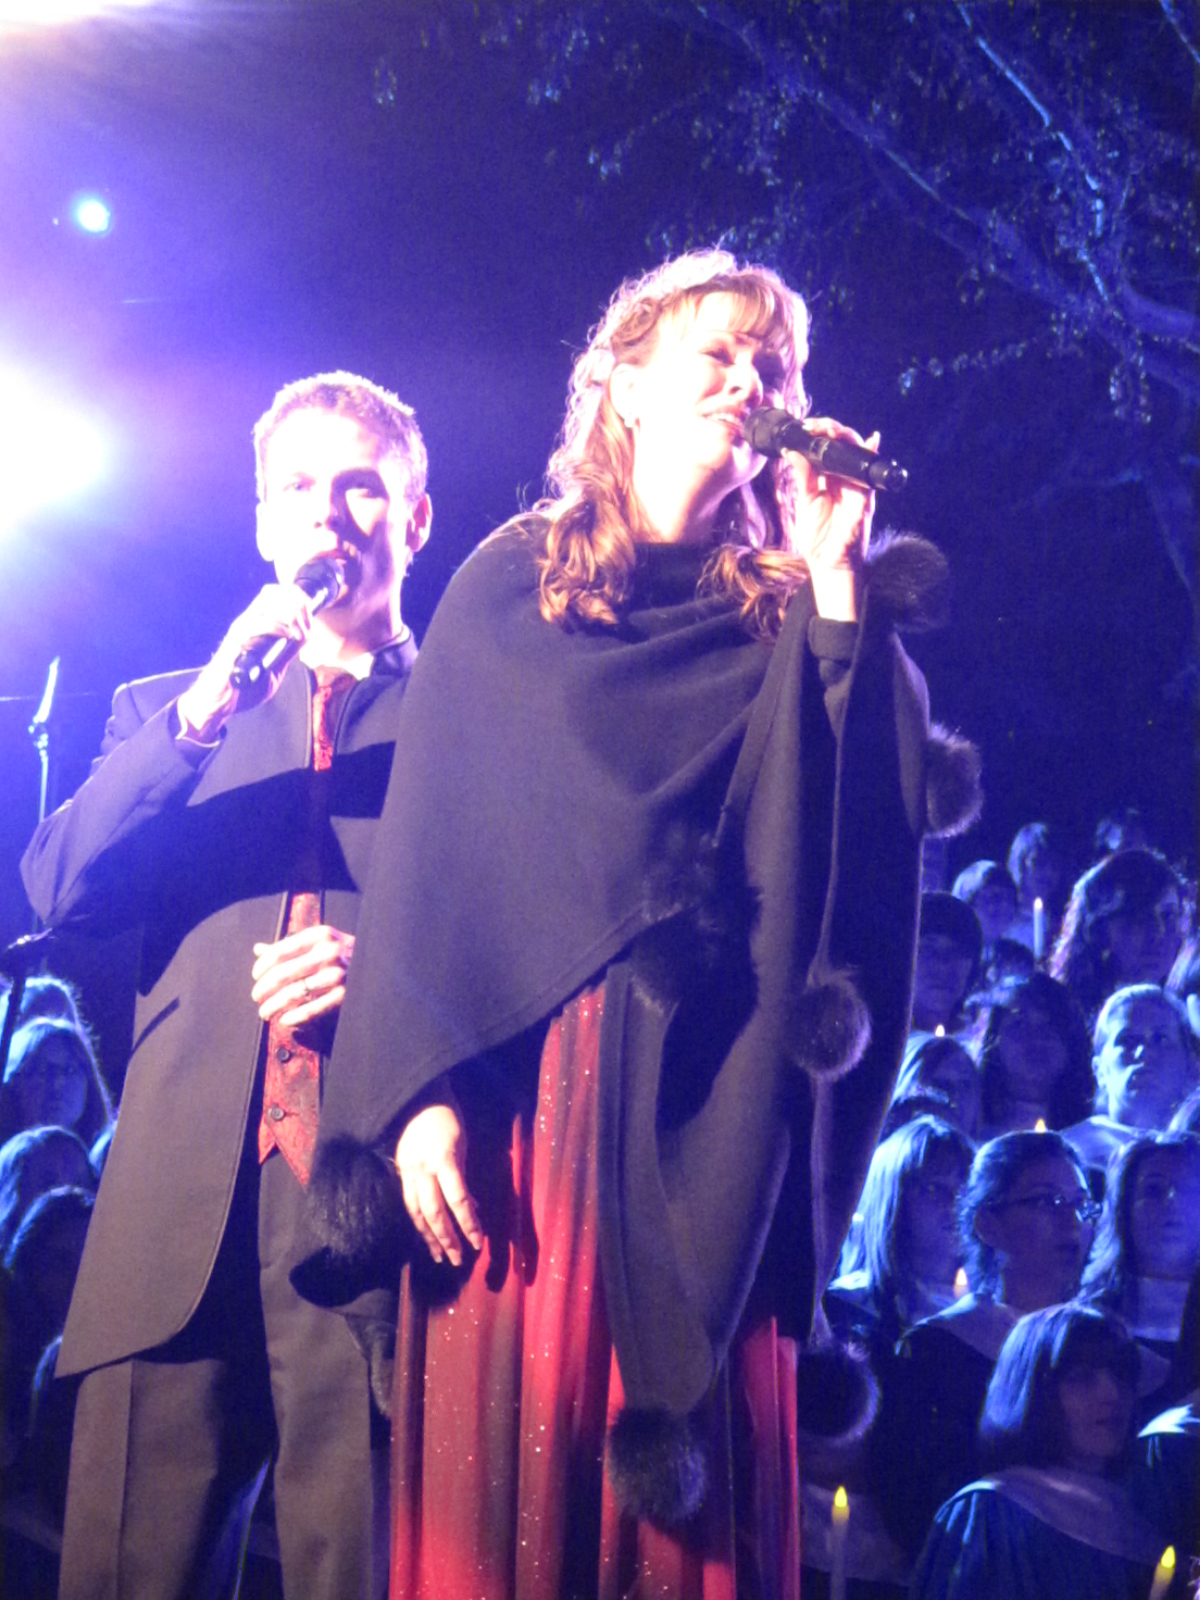 two people on stage one holding microphone while another holds her coat over her